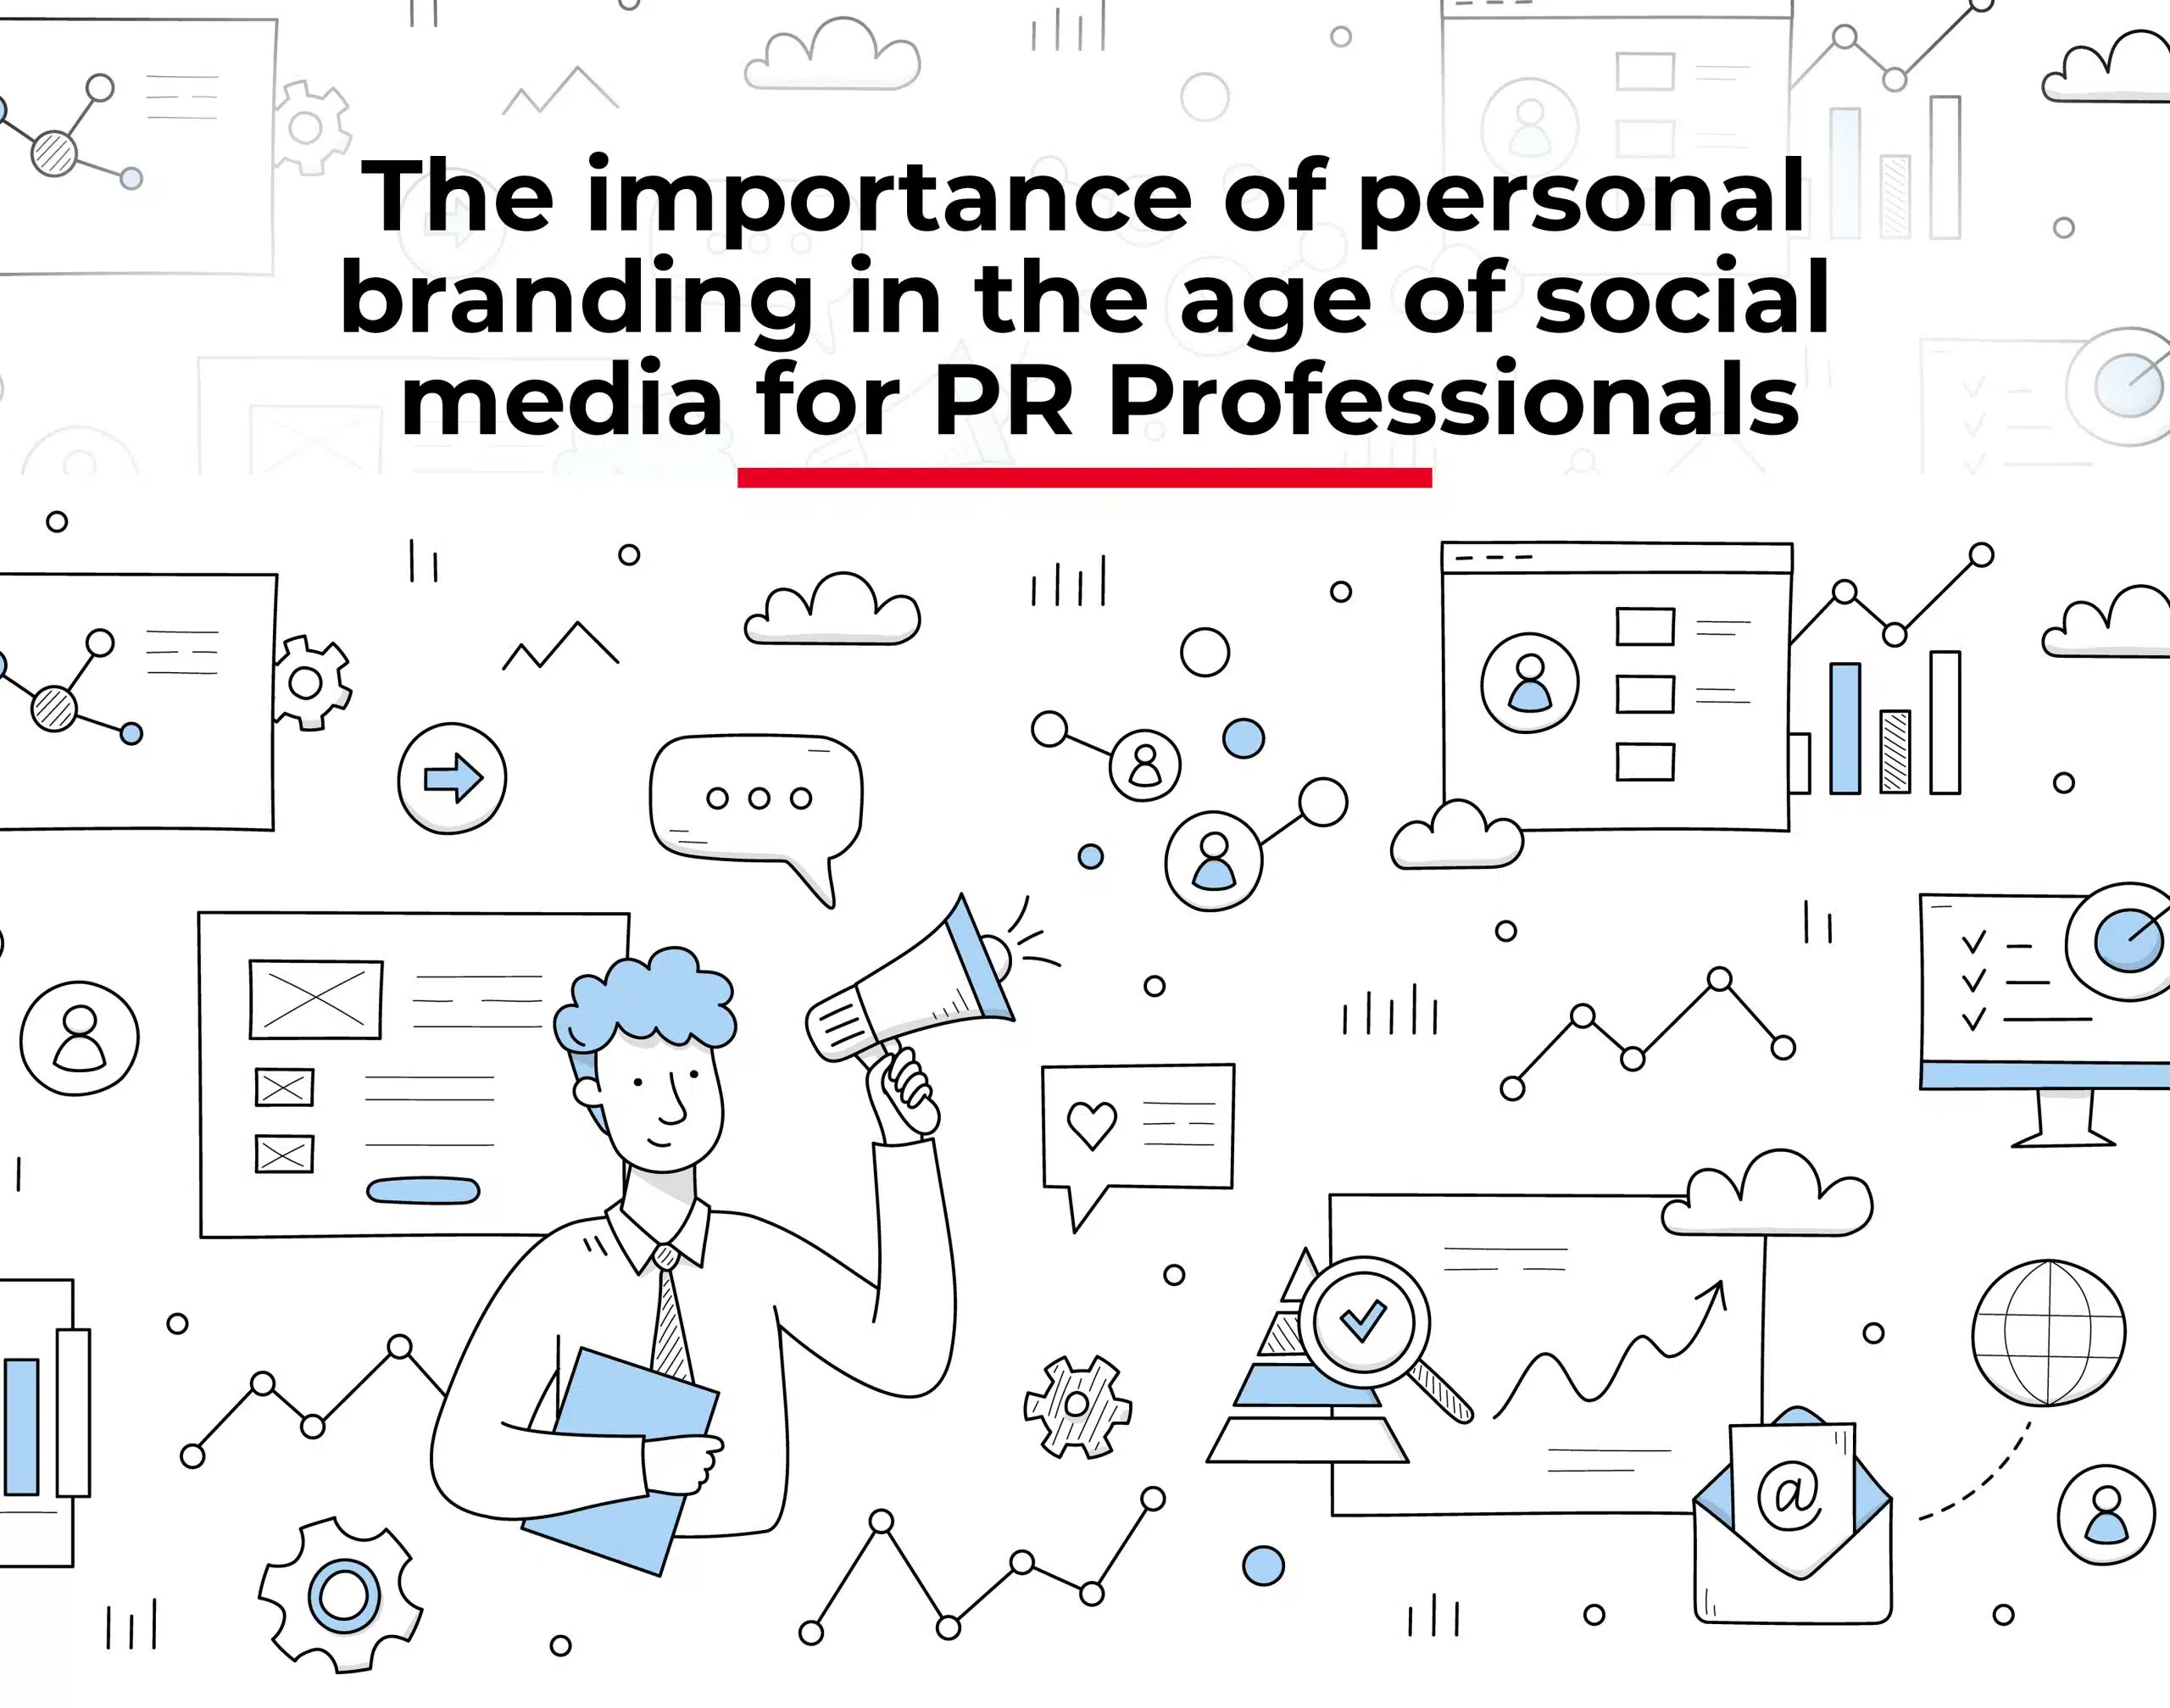 The importance of personal branding